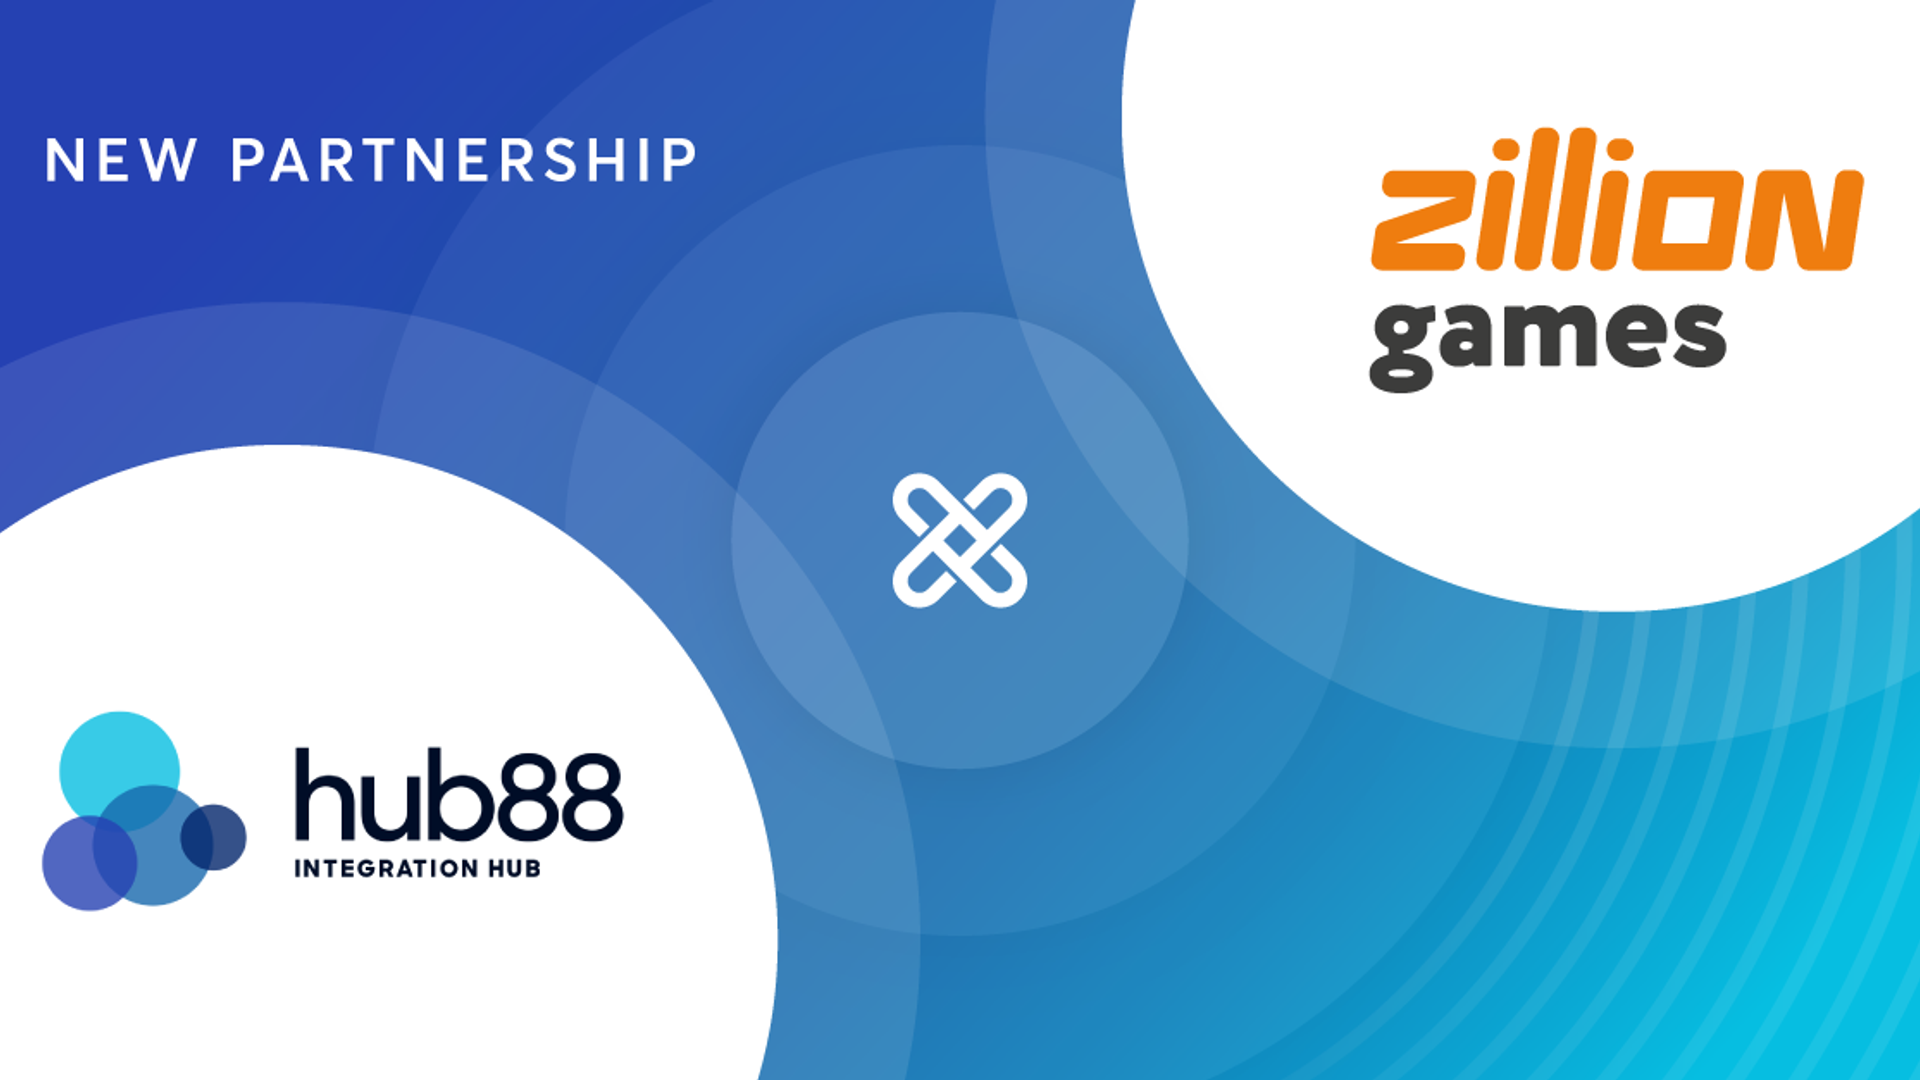 Cover Image for Hub88 boosts offering with Zillion Games content